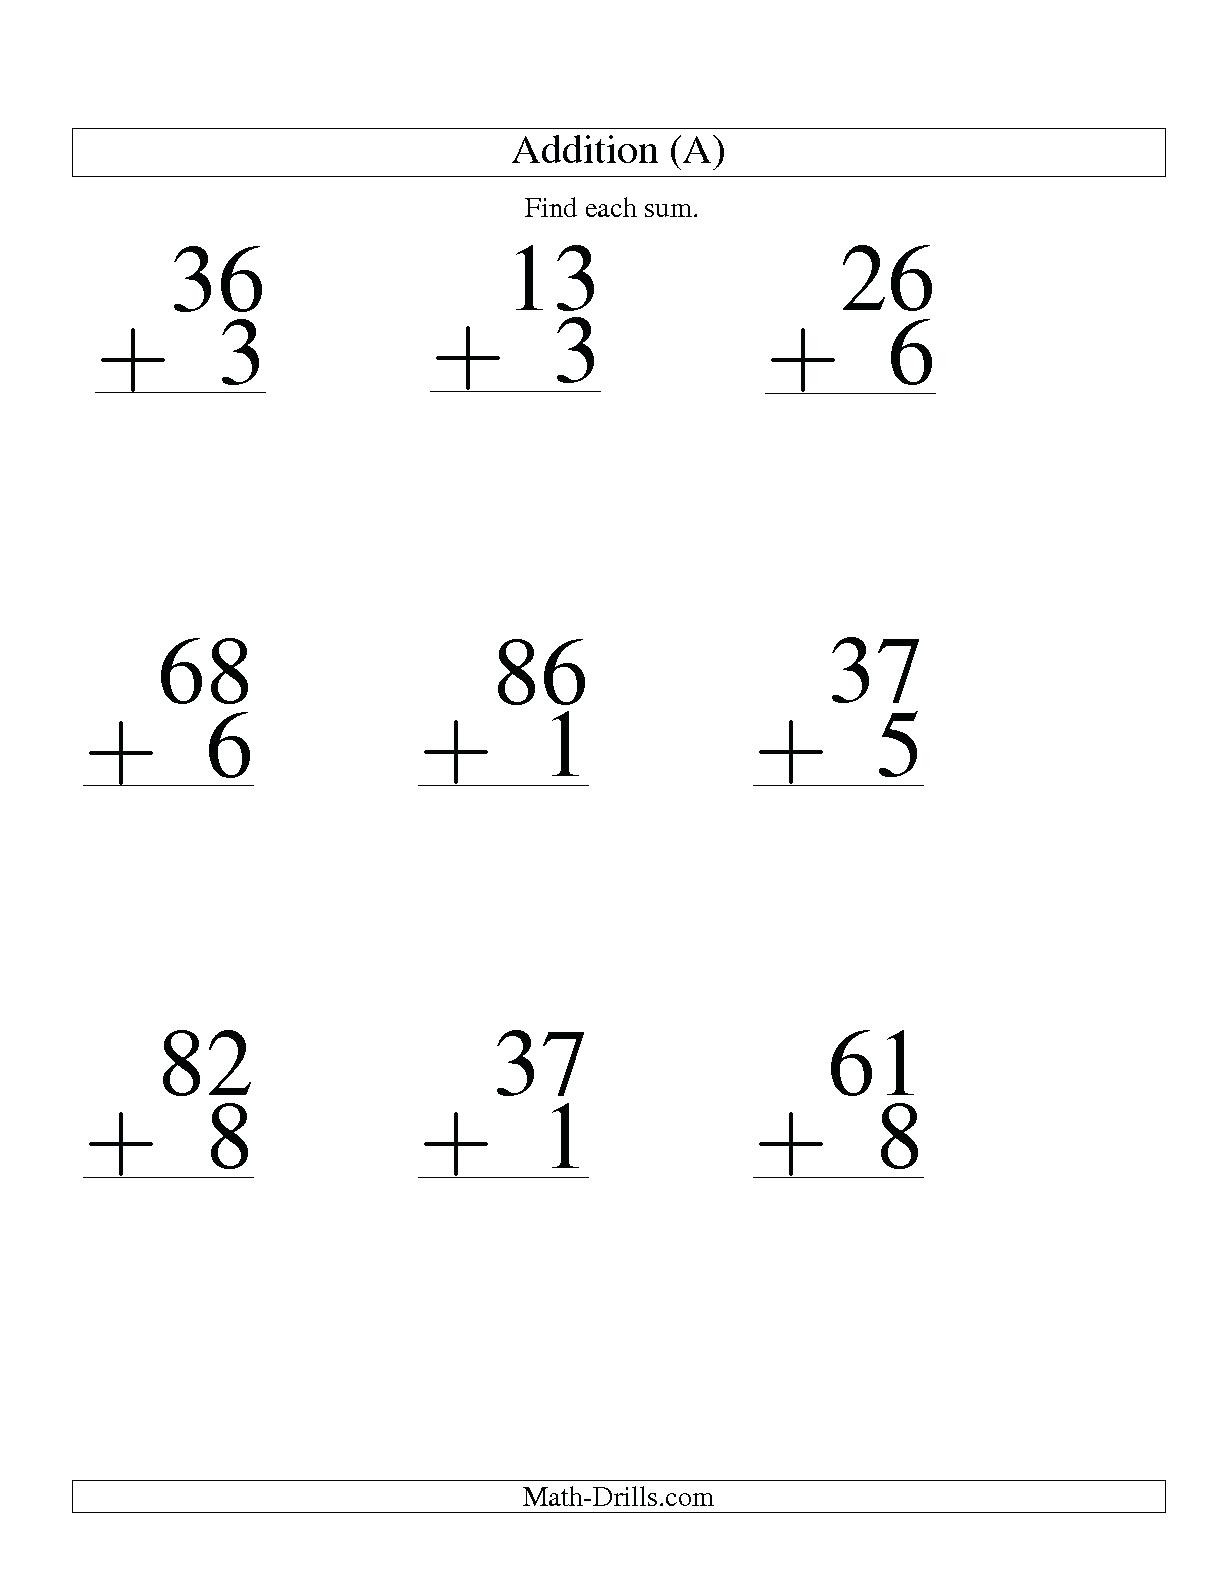 5-free-math-worksheets-first-grade-1-addition-adding-2-digit-plus-1-digit-no-regrouping-amp